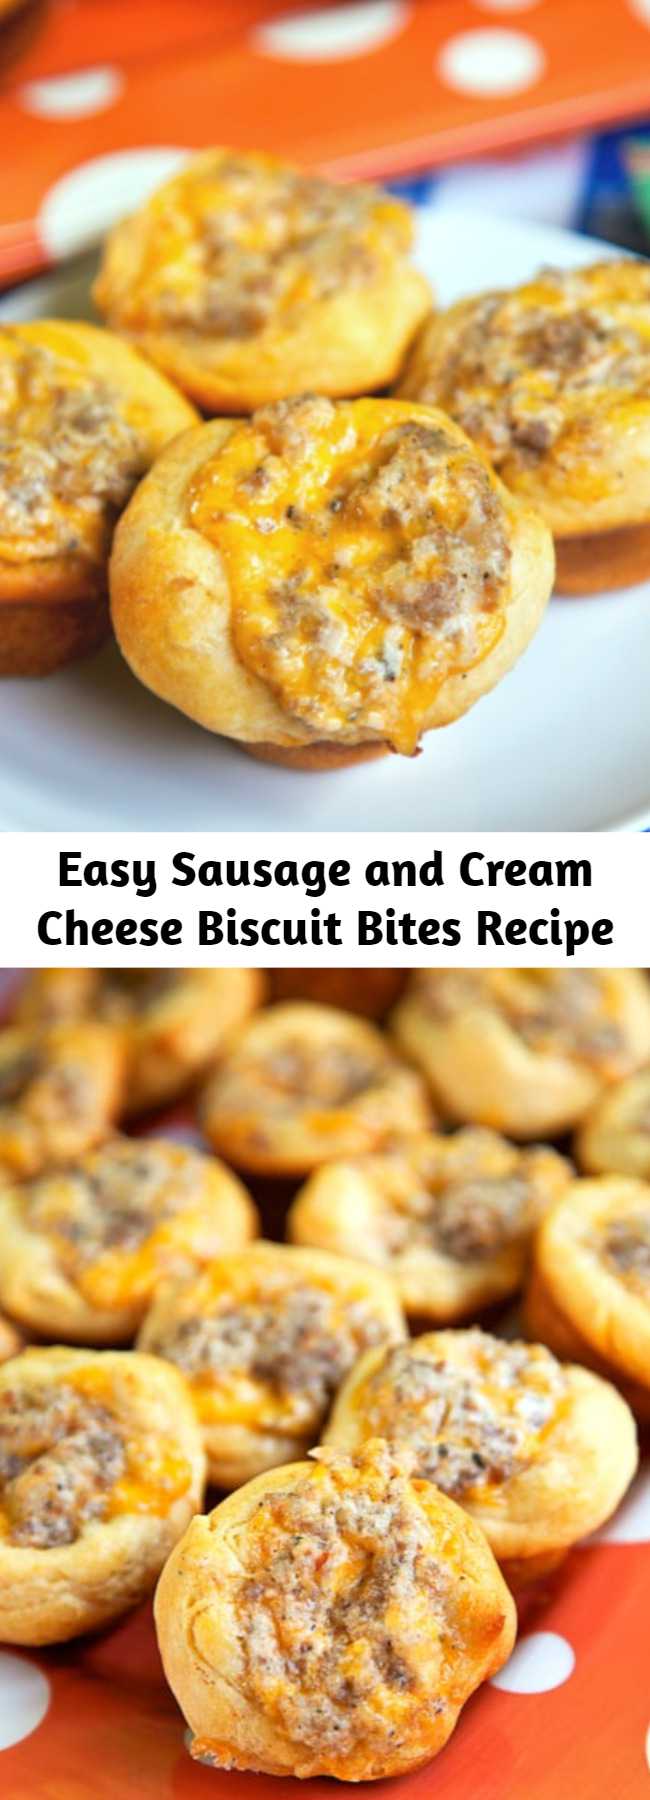 Sausage and Cream Cheese Biscuit Bites – so GOOD! I’m totally addicted to these things! Sausage, cream cheese, Worcestershire, cheddar cheese baked in biscuits. Can make the sausage mixture ahead of time and refrigerate until ready to bake. Great for tailgating, breakfast and parties! Everyone loves this recipe!